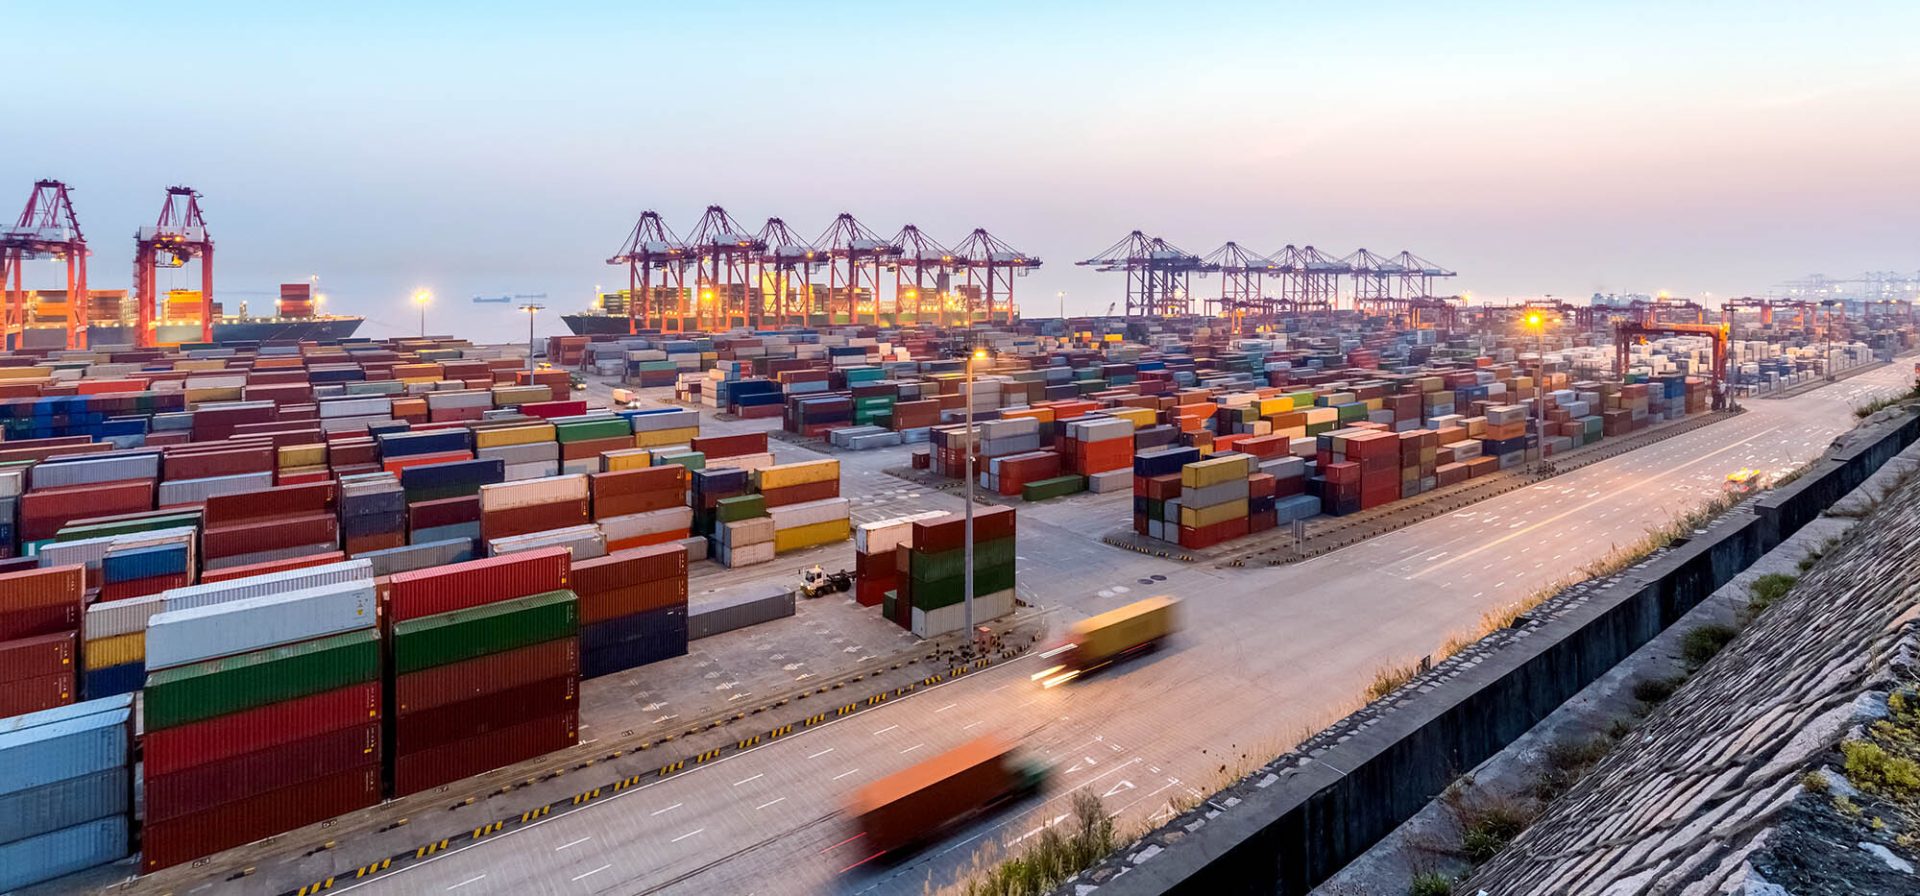 Intermodality: the role of inland port in reducing emissions